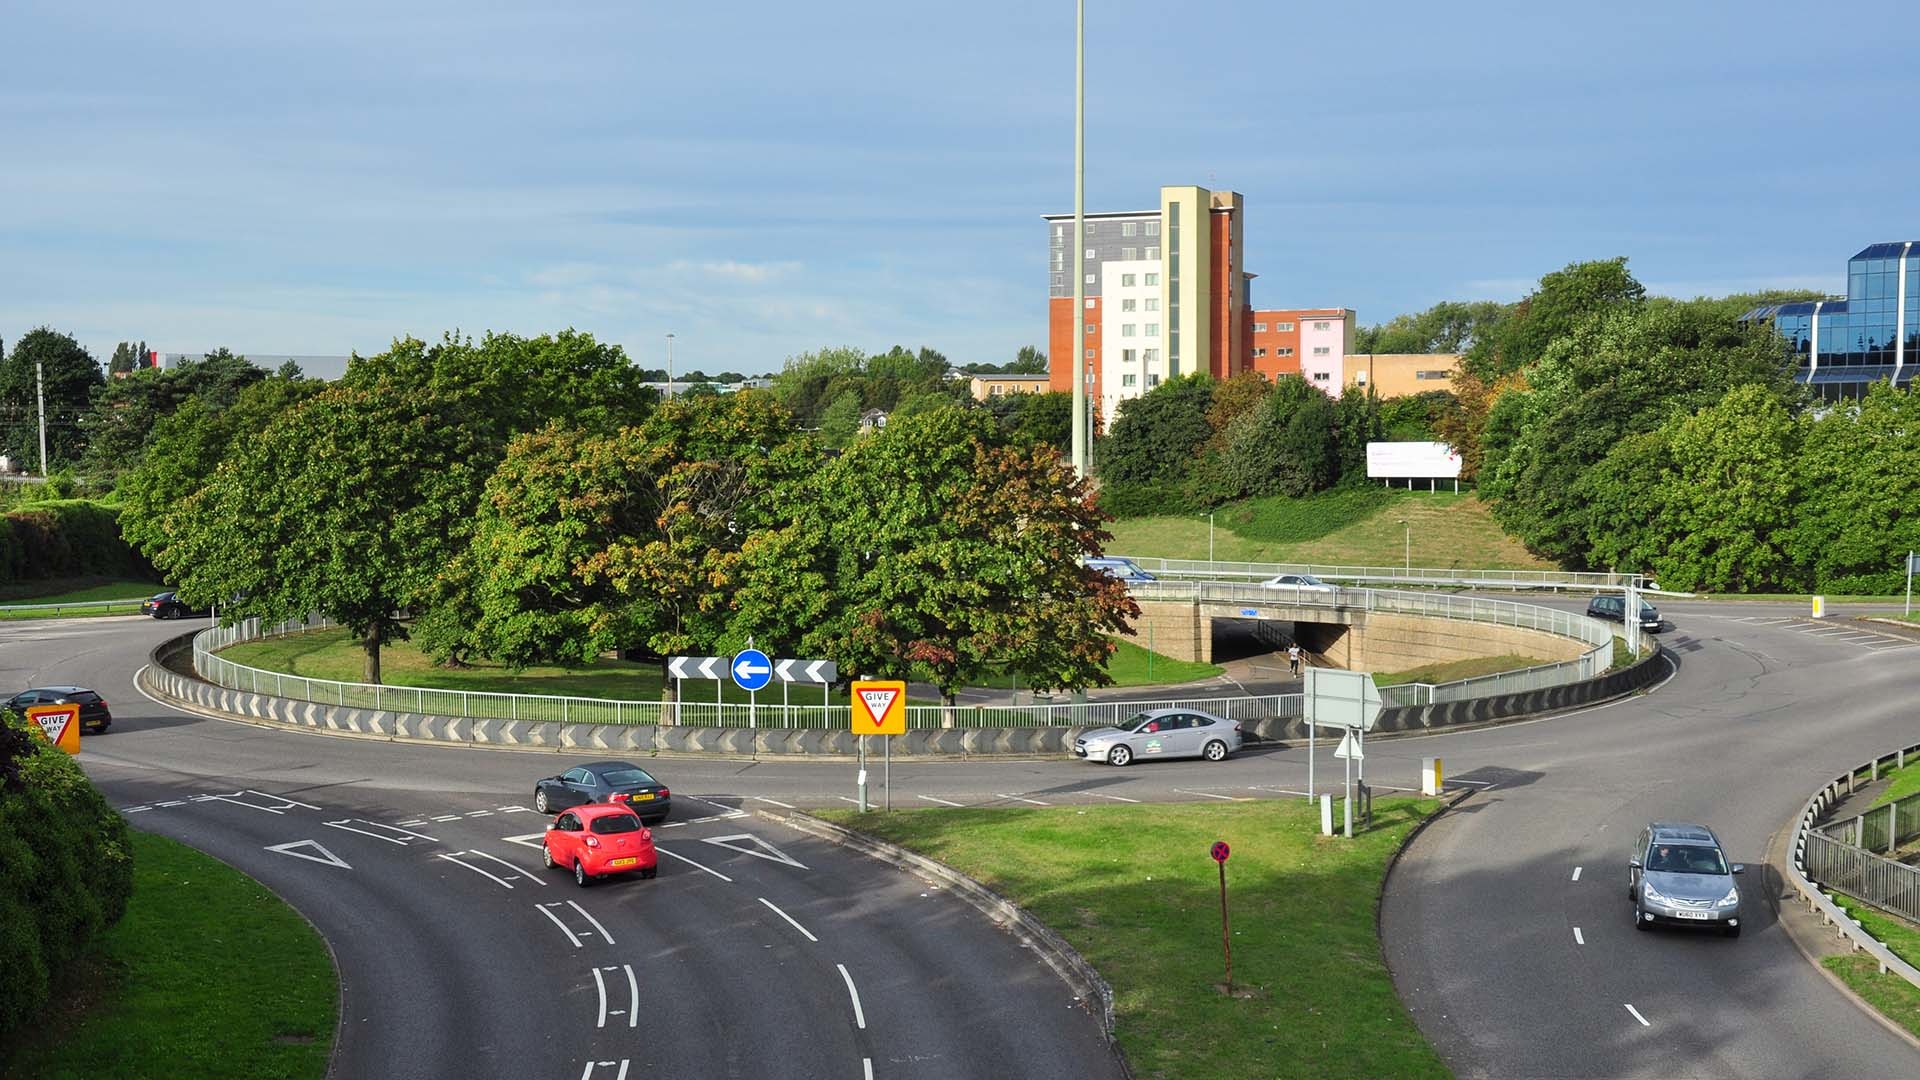 Roundabout in Stevenage